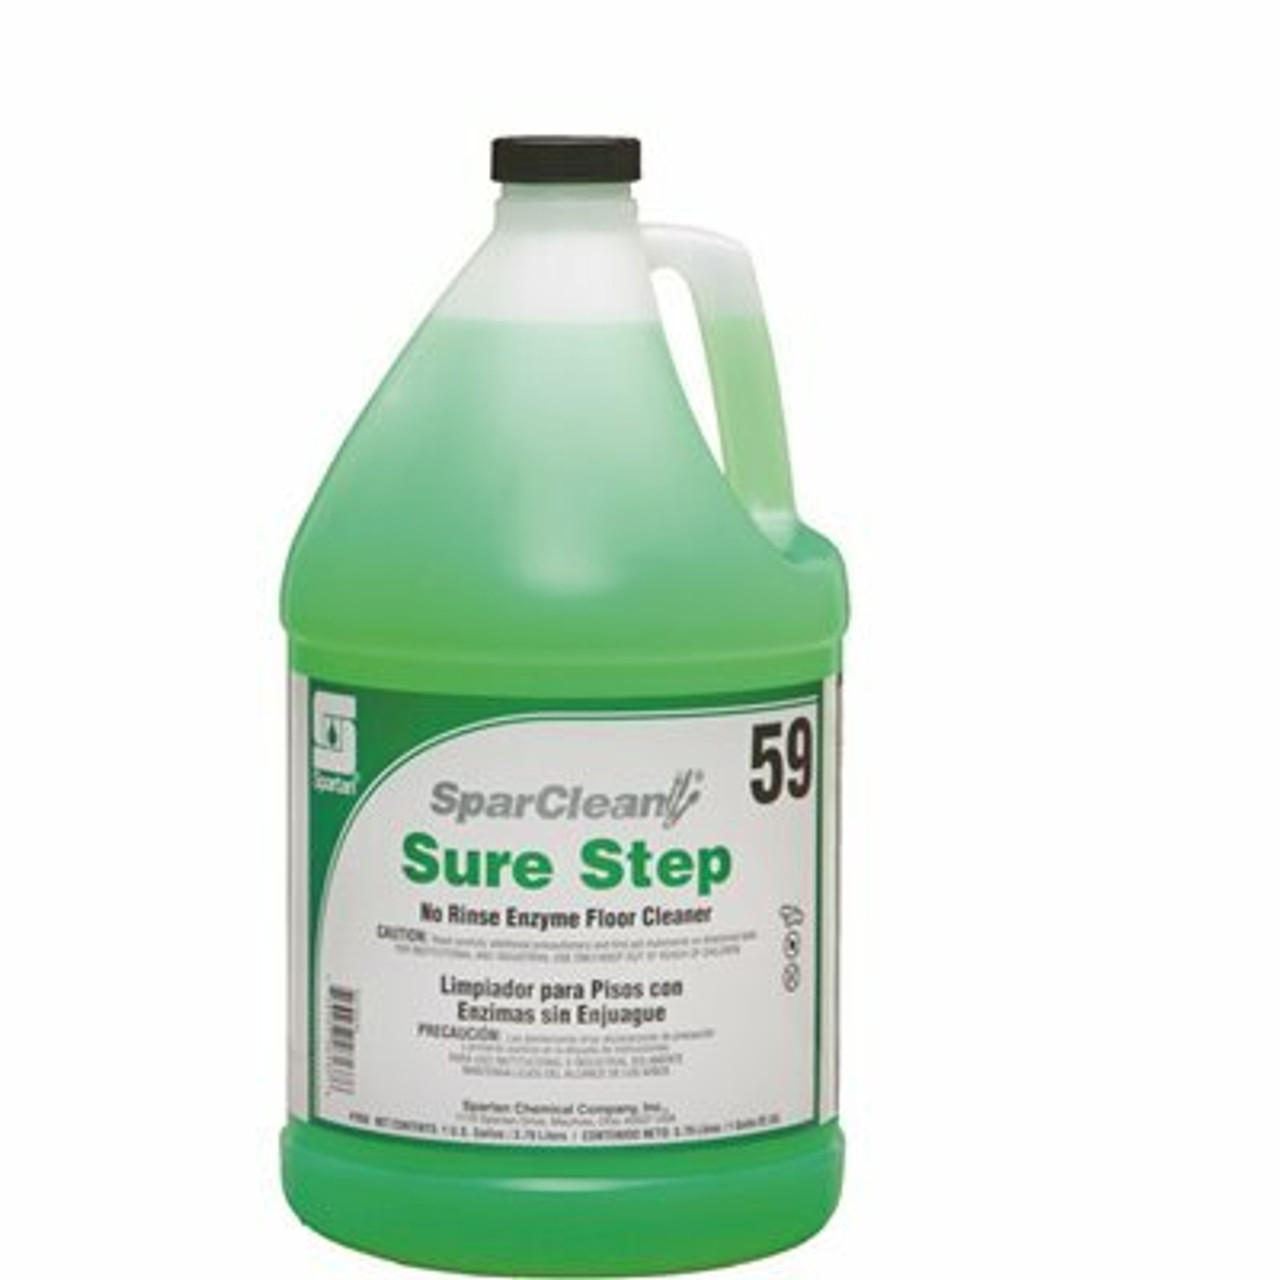 Spartan Chemical Company Sparclean Sure Step 1 Gallon Clean Scent Enzyme Floor Cleaner (4 Per Pack)